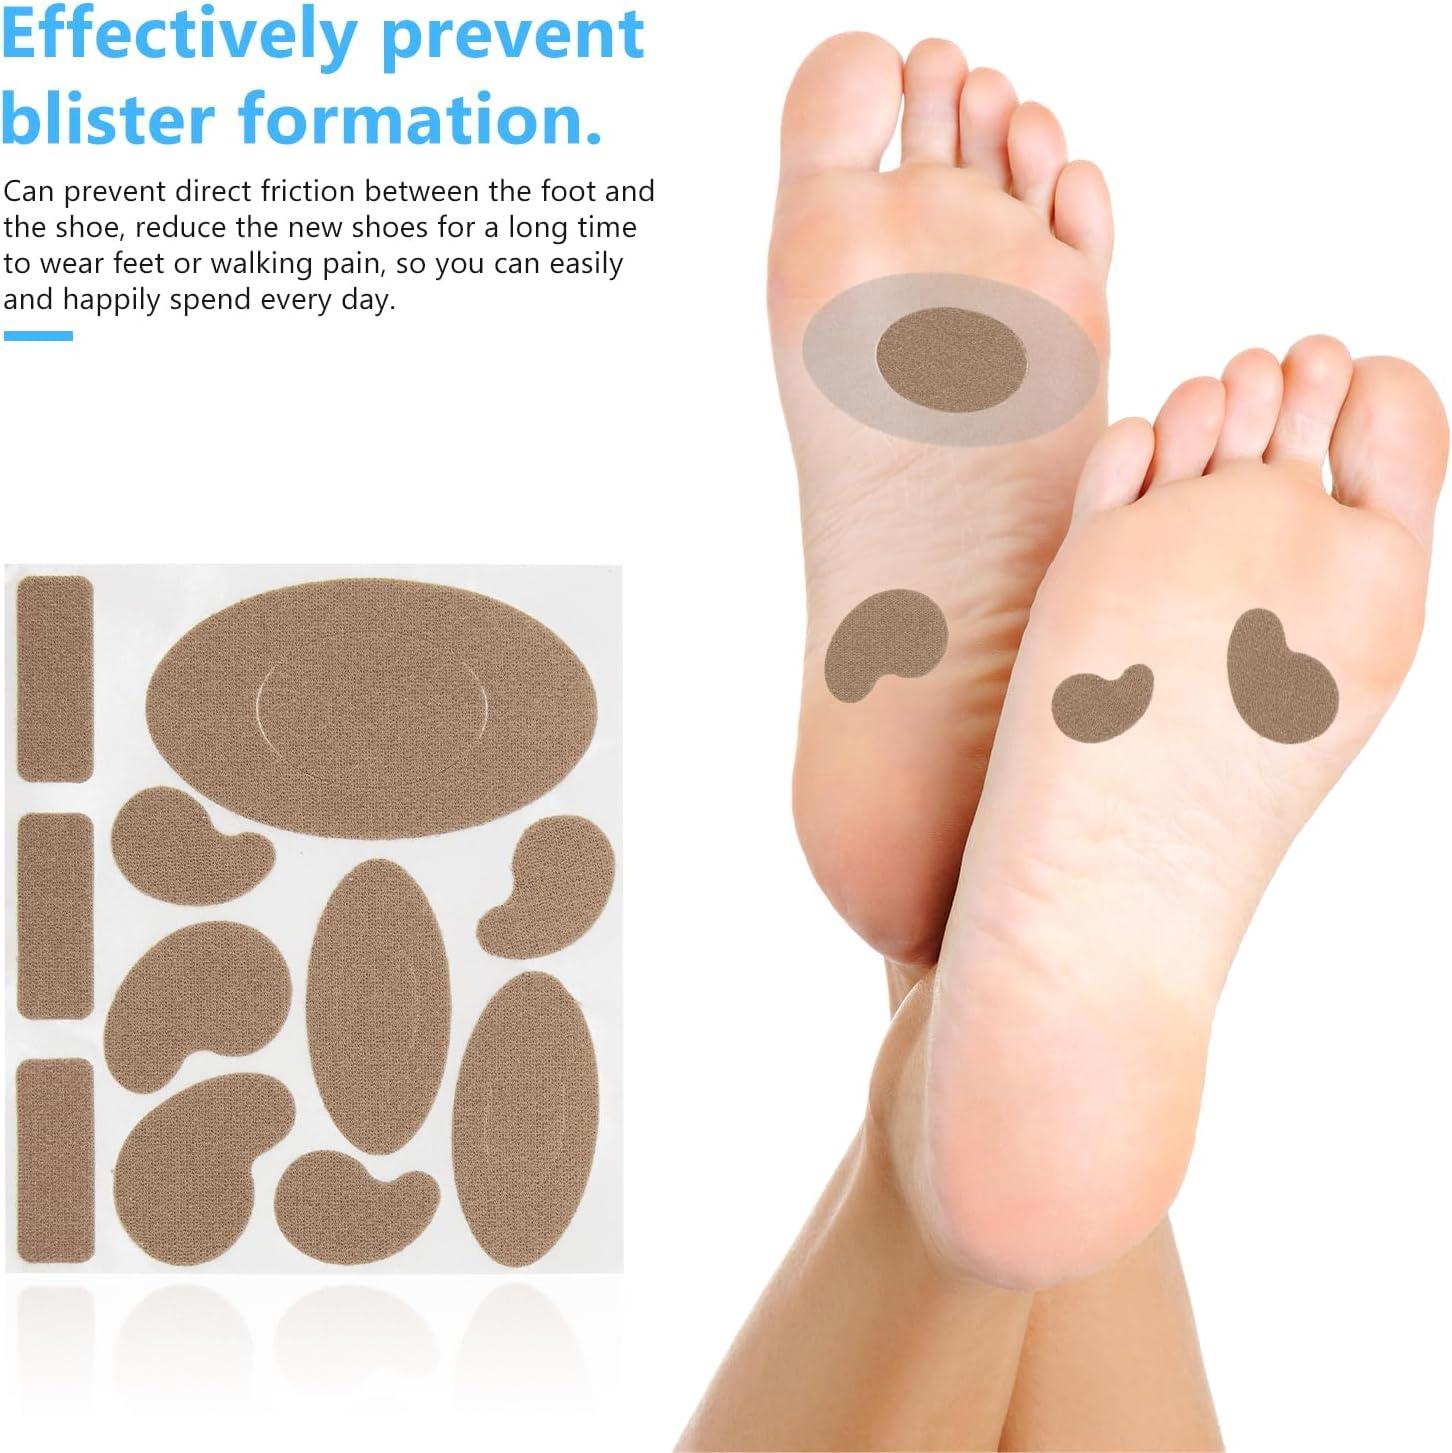 Moleskin Tape Flannel Adhesive Pads Stickers Blister Prevention Pads  Anti-wear Heel Pads for Feet Fabric Padding, 11 Shapes (110 Pieces)